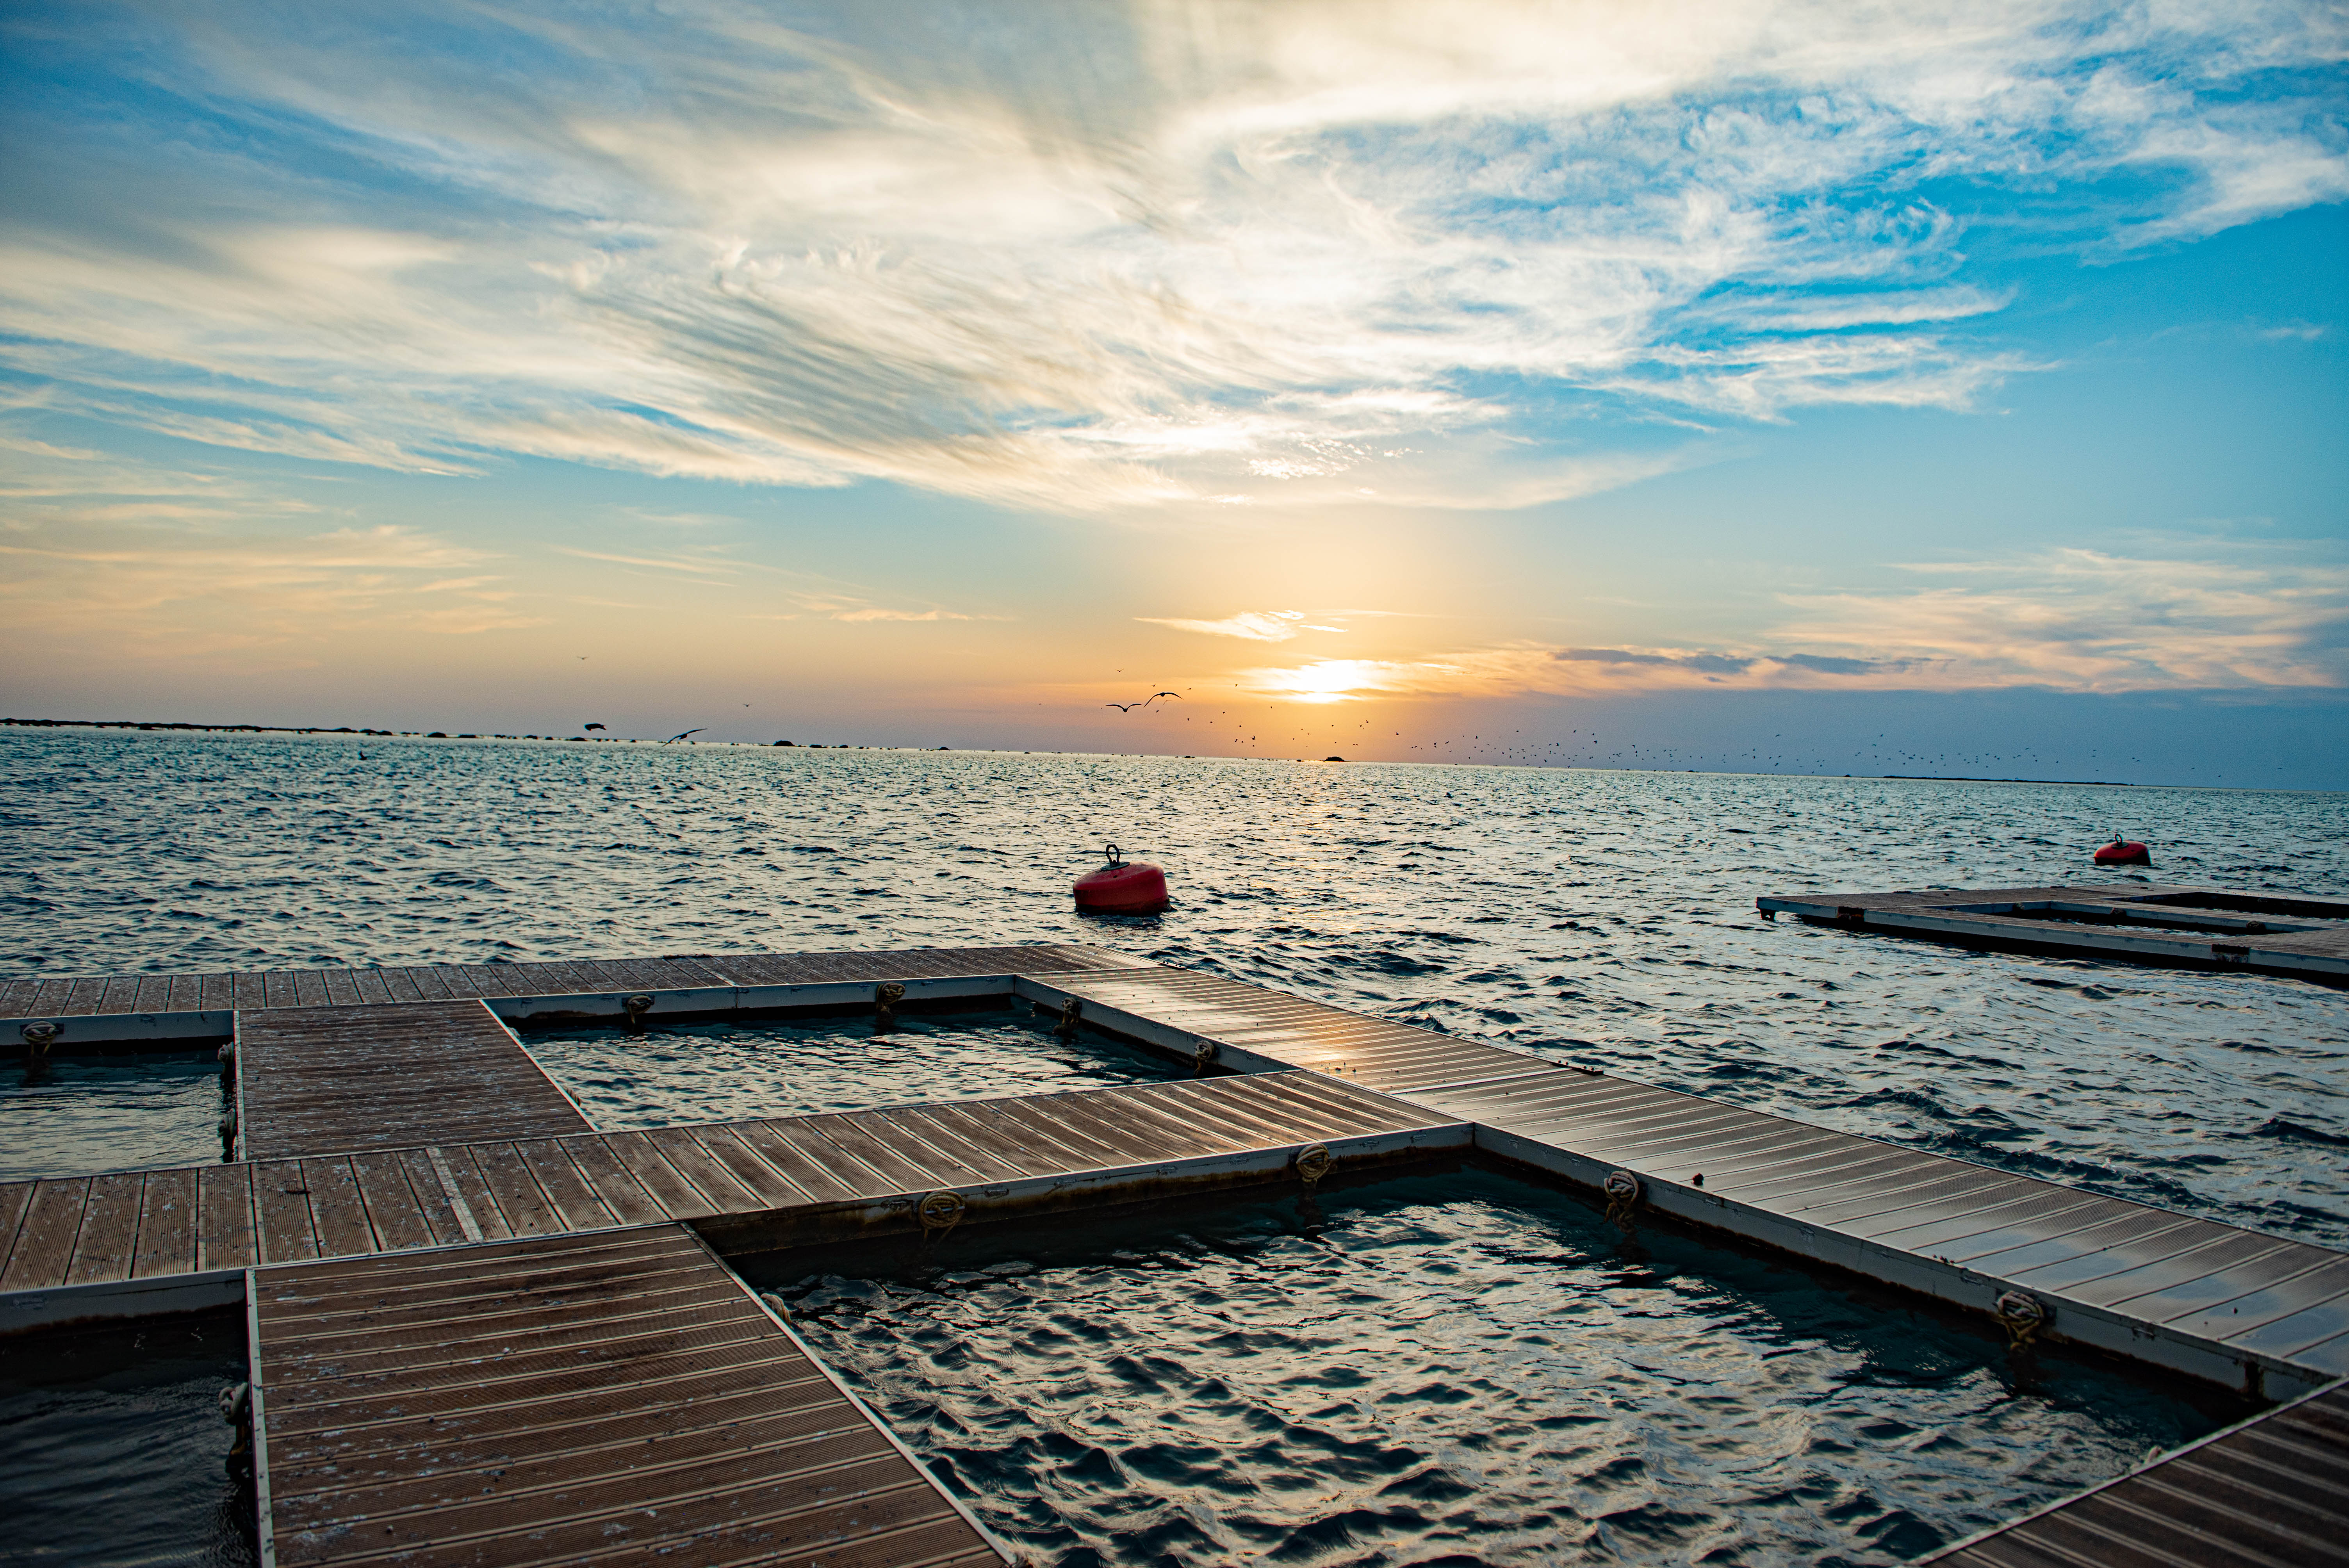 The sun sets on the Red Sea, with the planks of the coral nurseries in the foreground